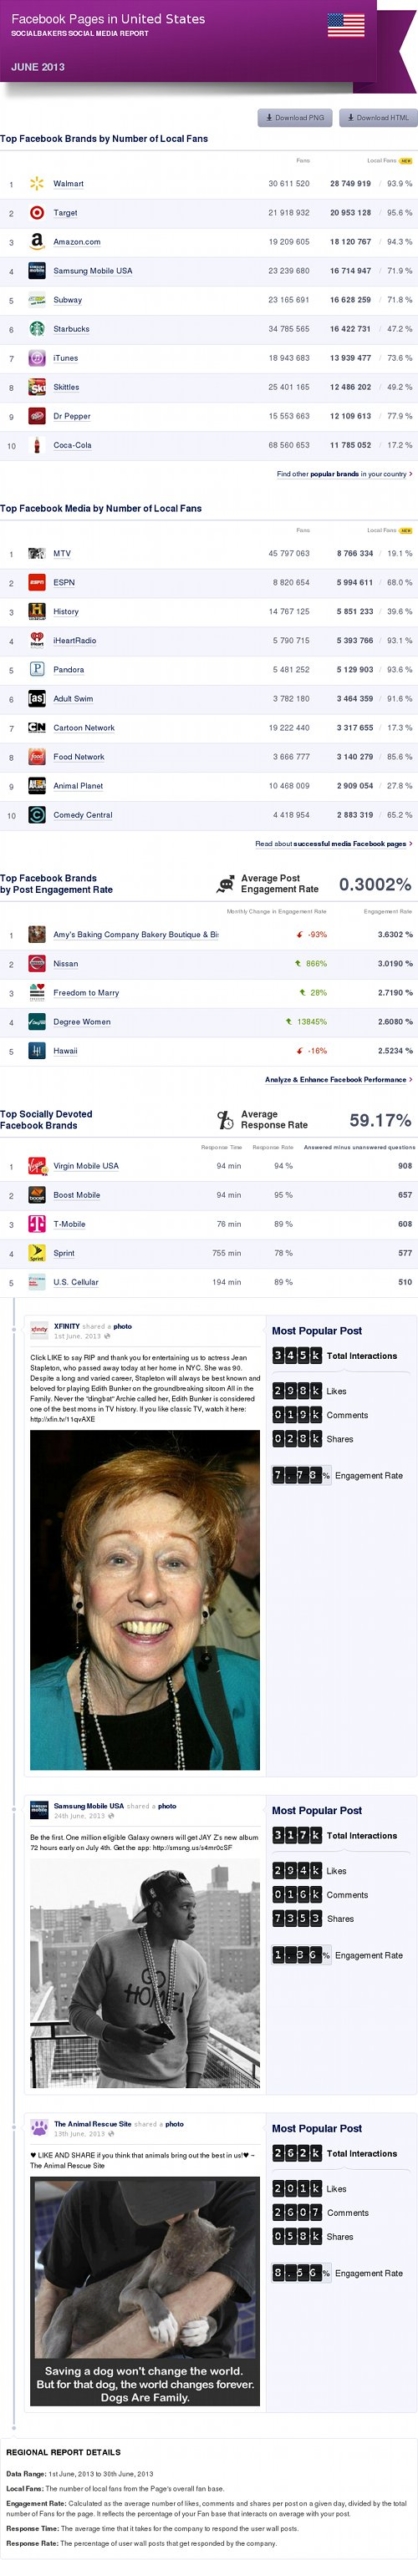 Top Facebook Pages in the US, June ’13